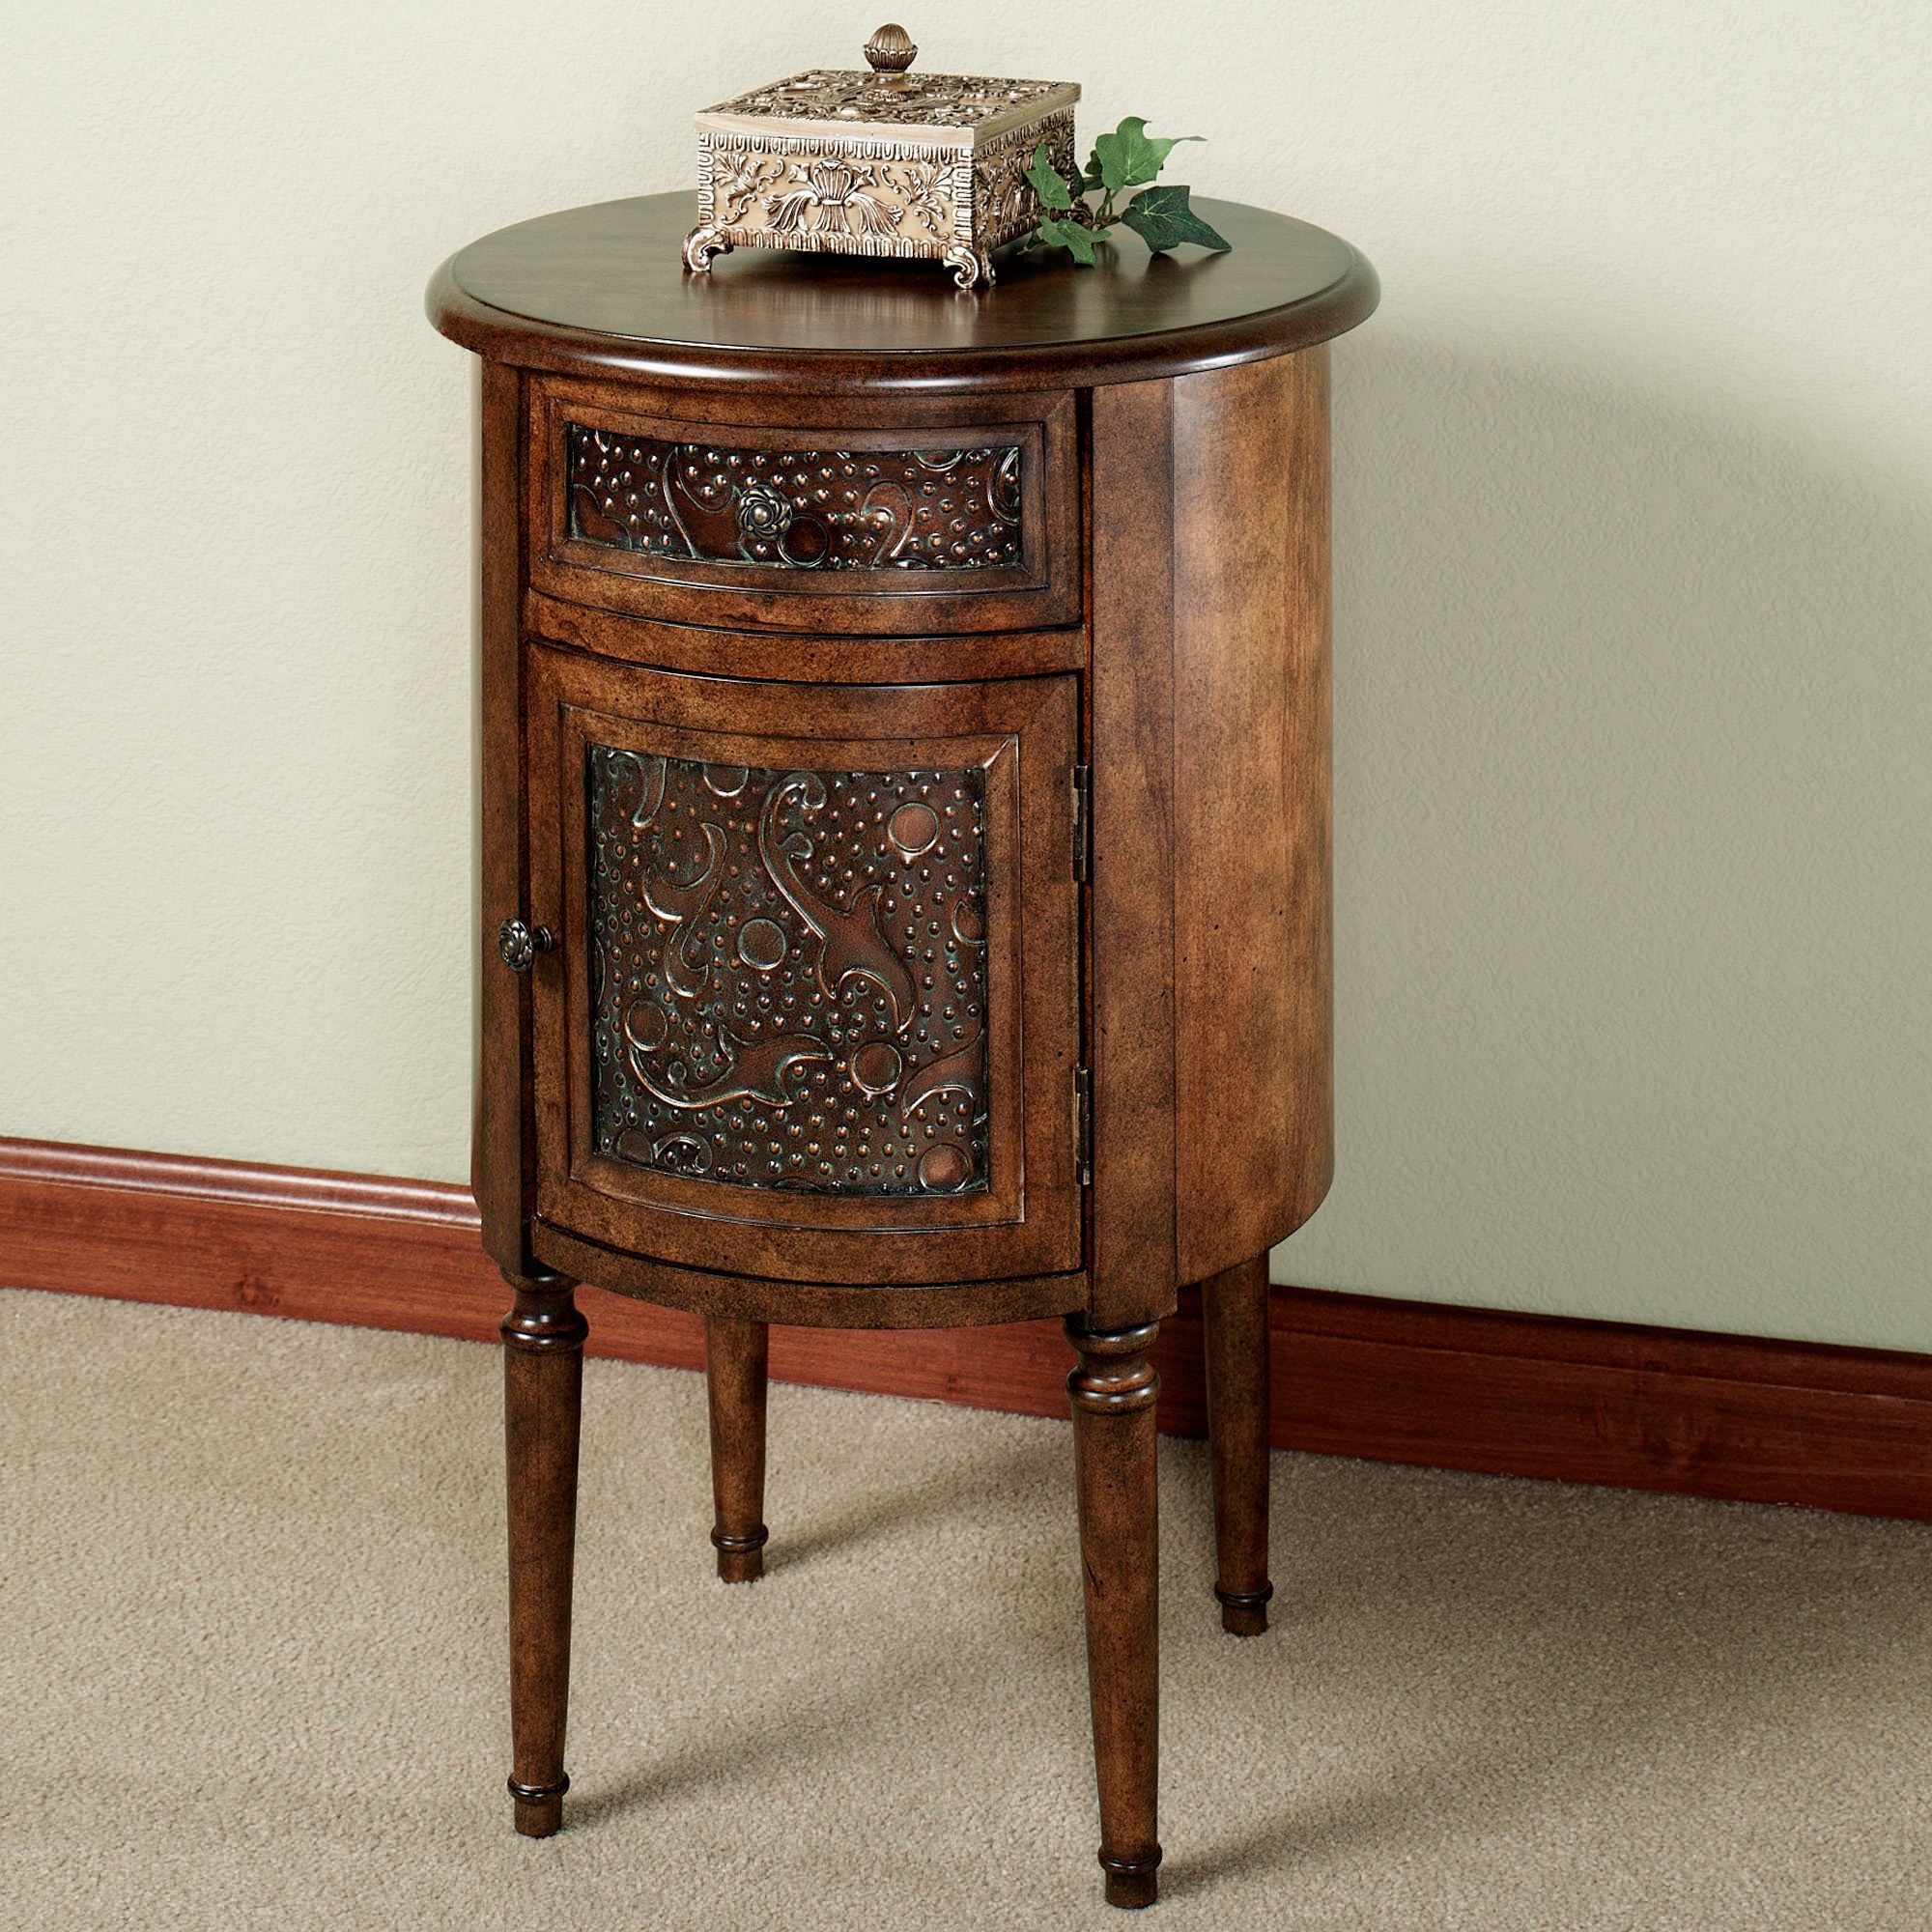 astounding side accent tables absolutely ideas table best gold with storage corner darkod drawer round for living room small glass coaster furniture nightstand rustic couch classy